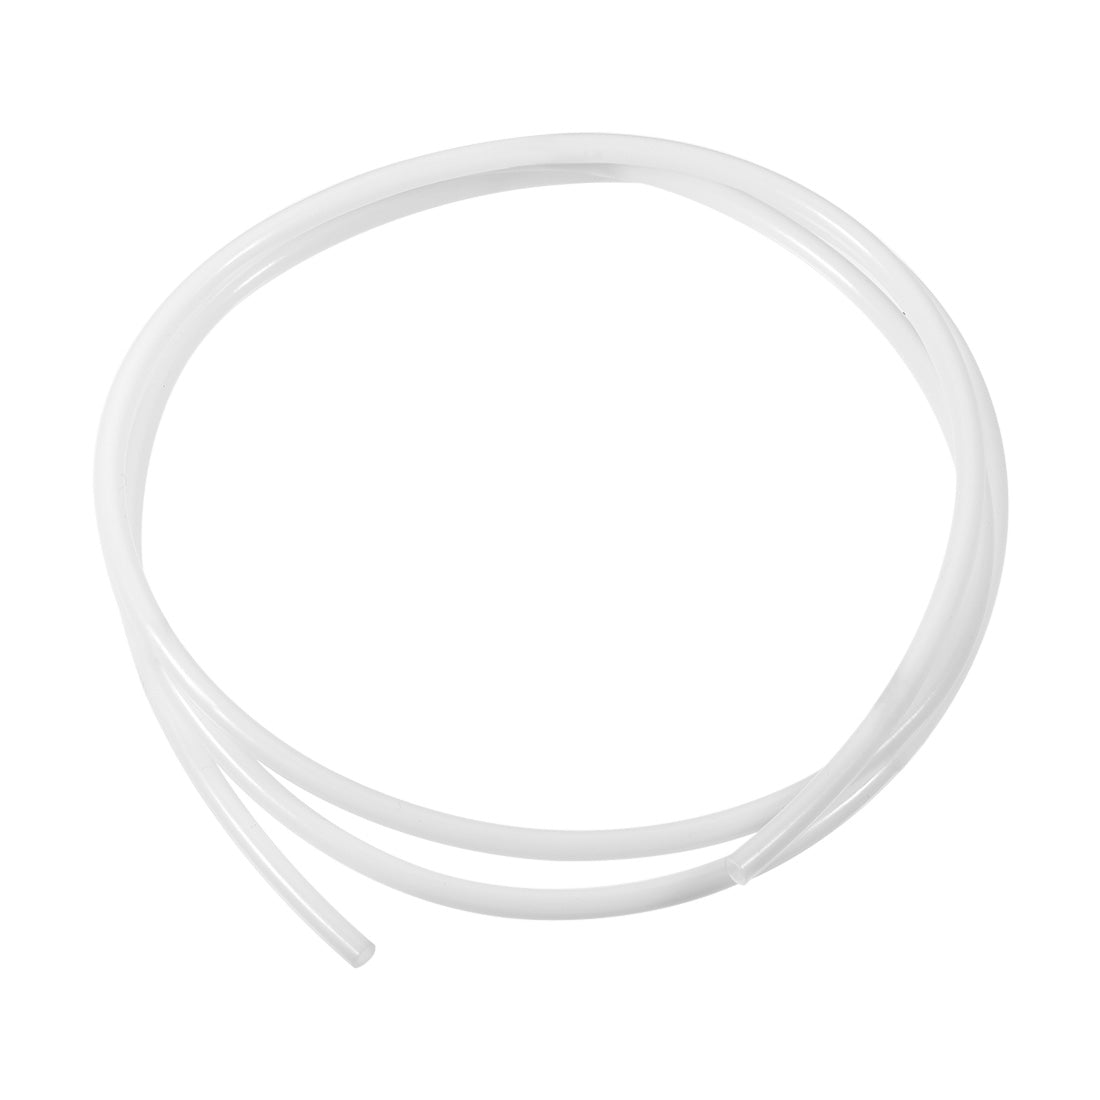 uxcell Uxcell PTFE Tube 4.9Ft - ID 4mm x OD 6mm Fit 3mm Filament for 3D Printer White